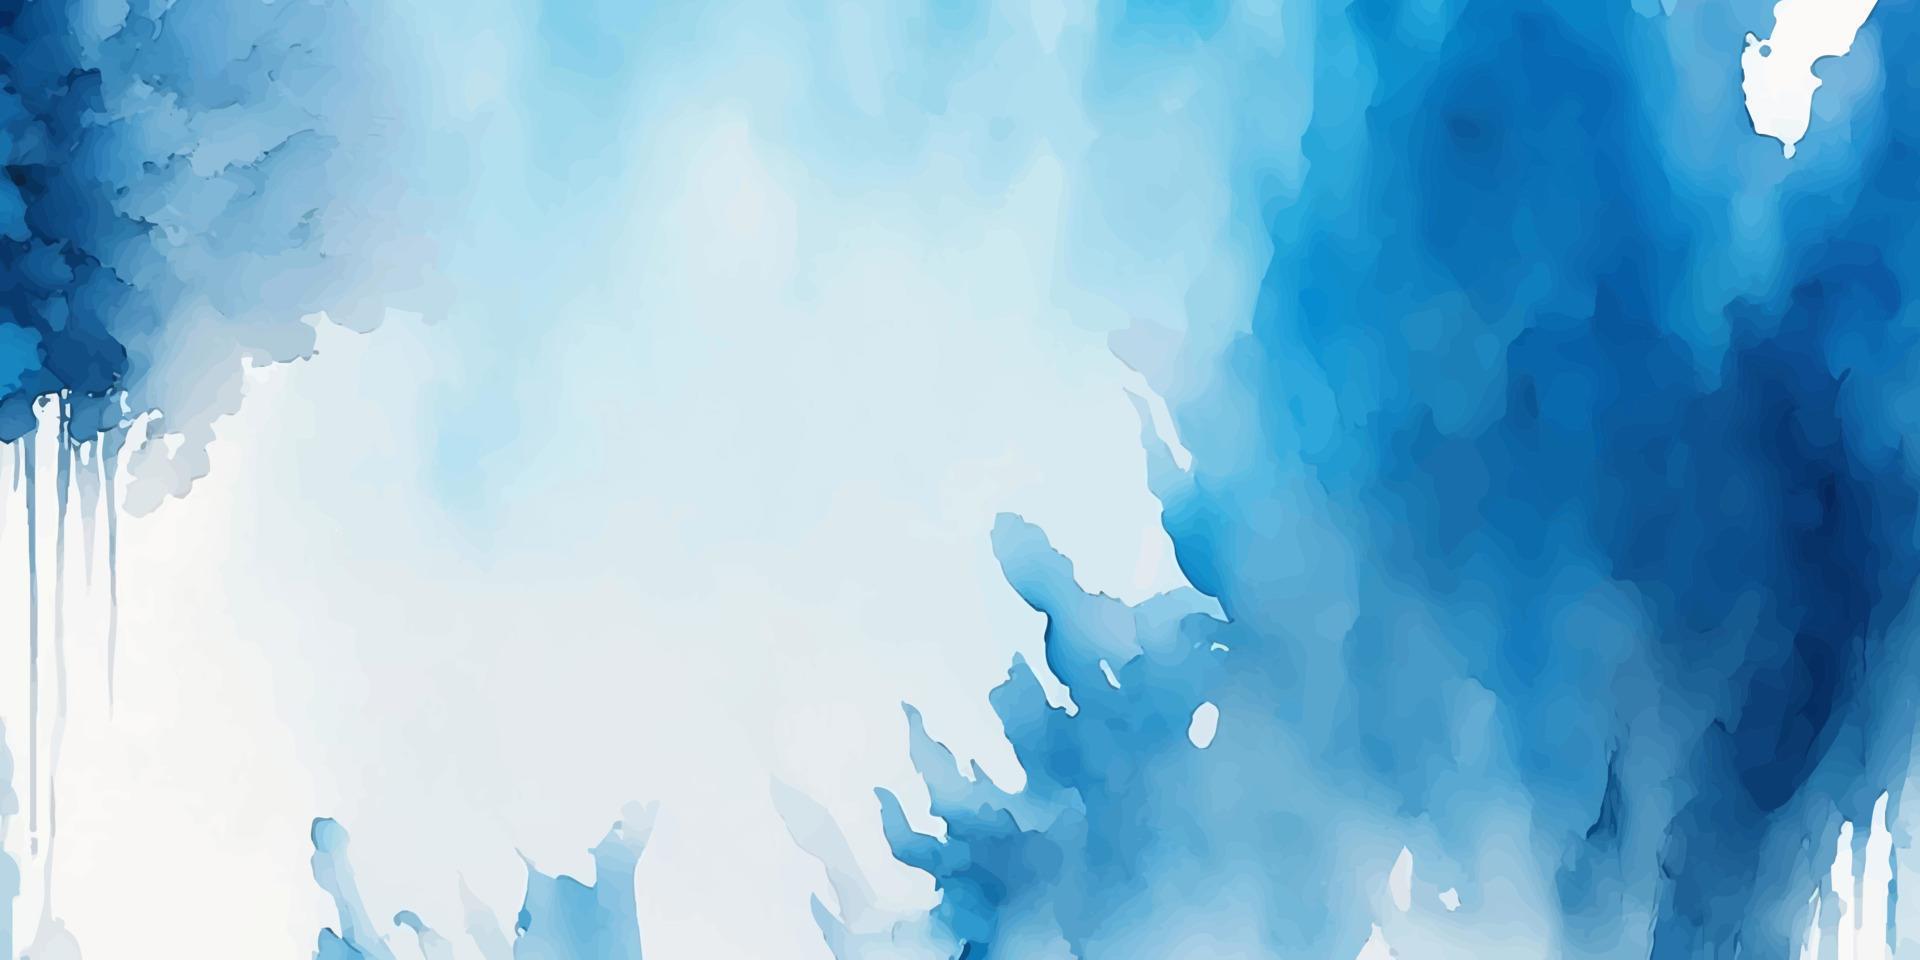 Abstract blue watercolor backdrop. Artistic vector illustration for decorative design of background, header, brochure, poster, card, cover or banner